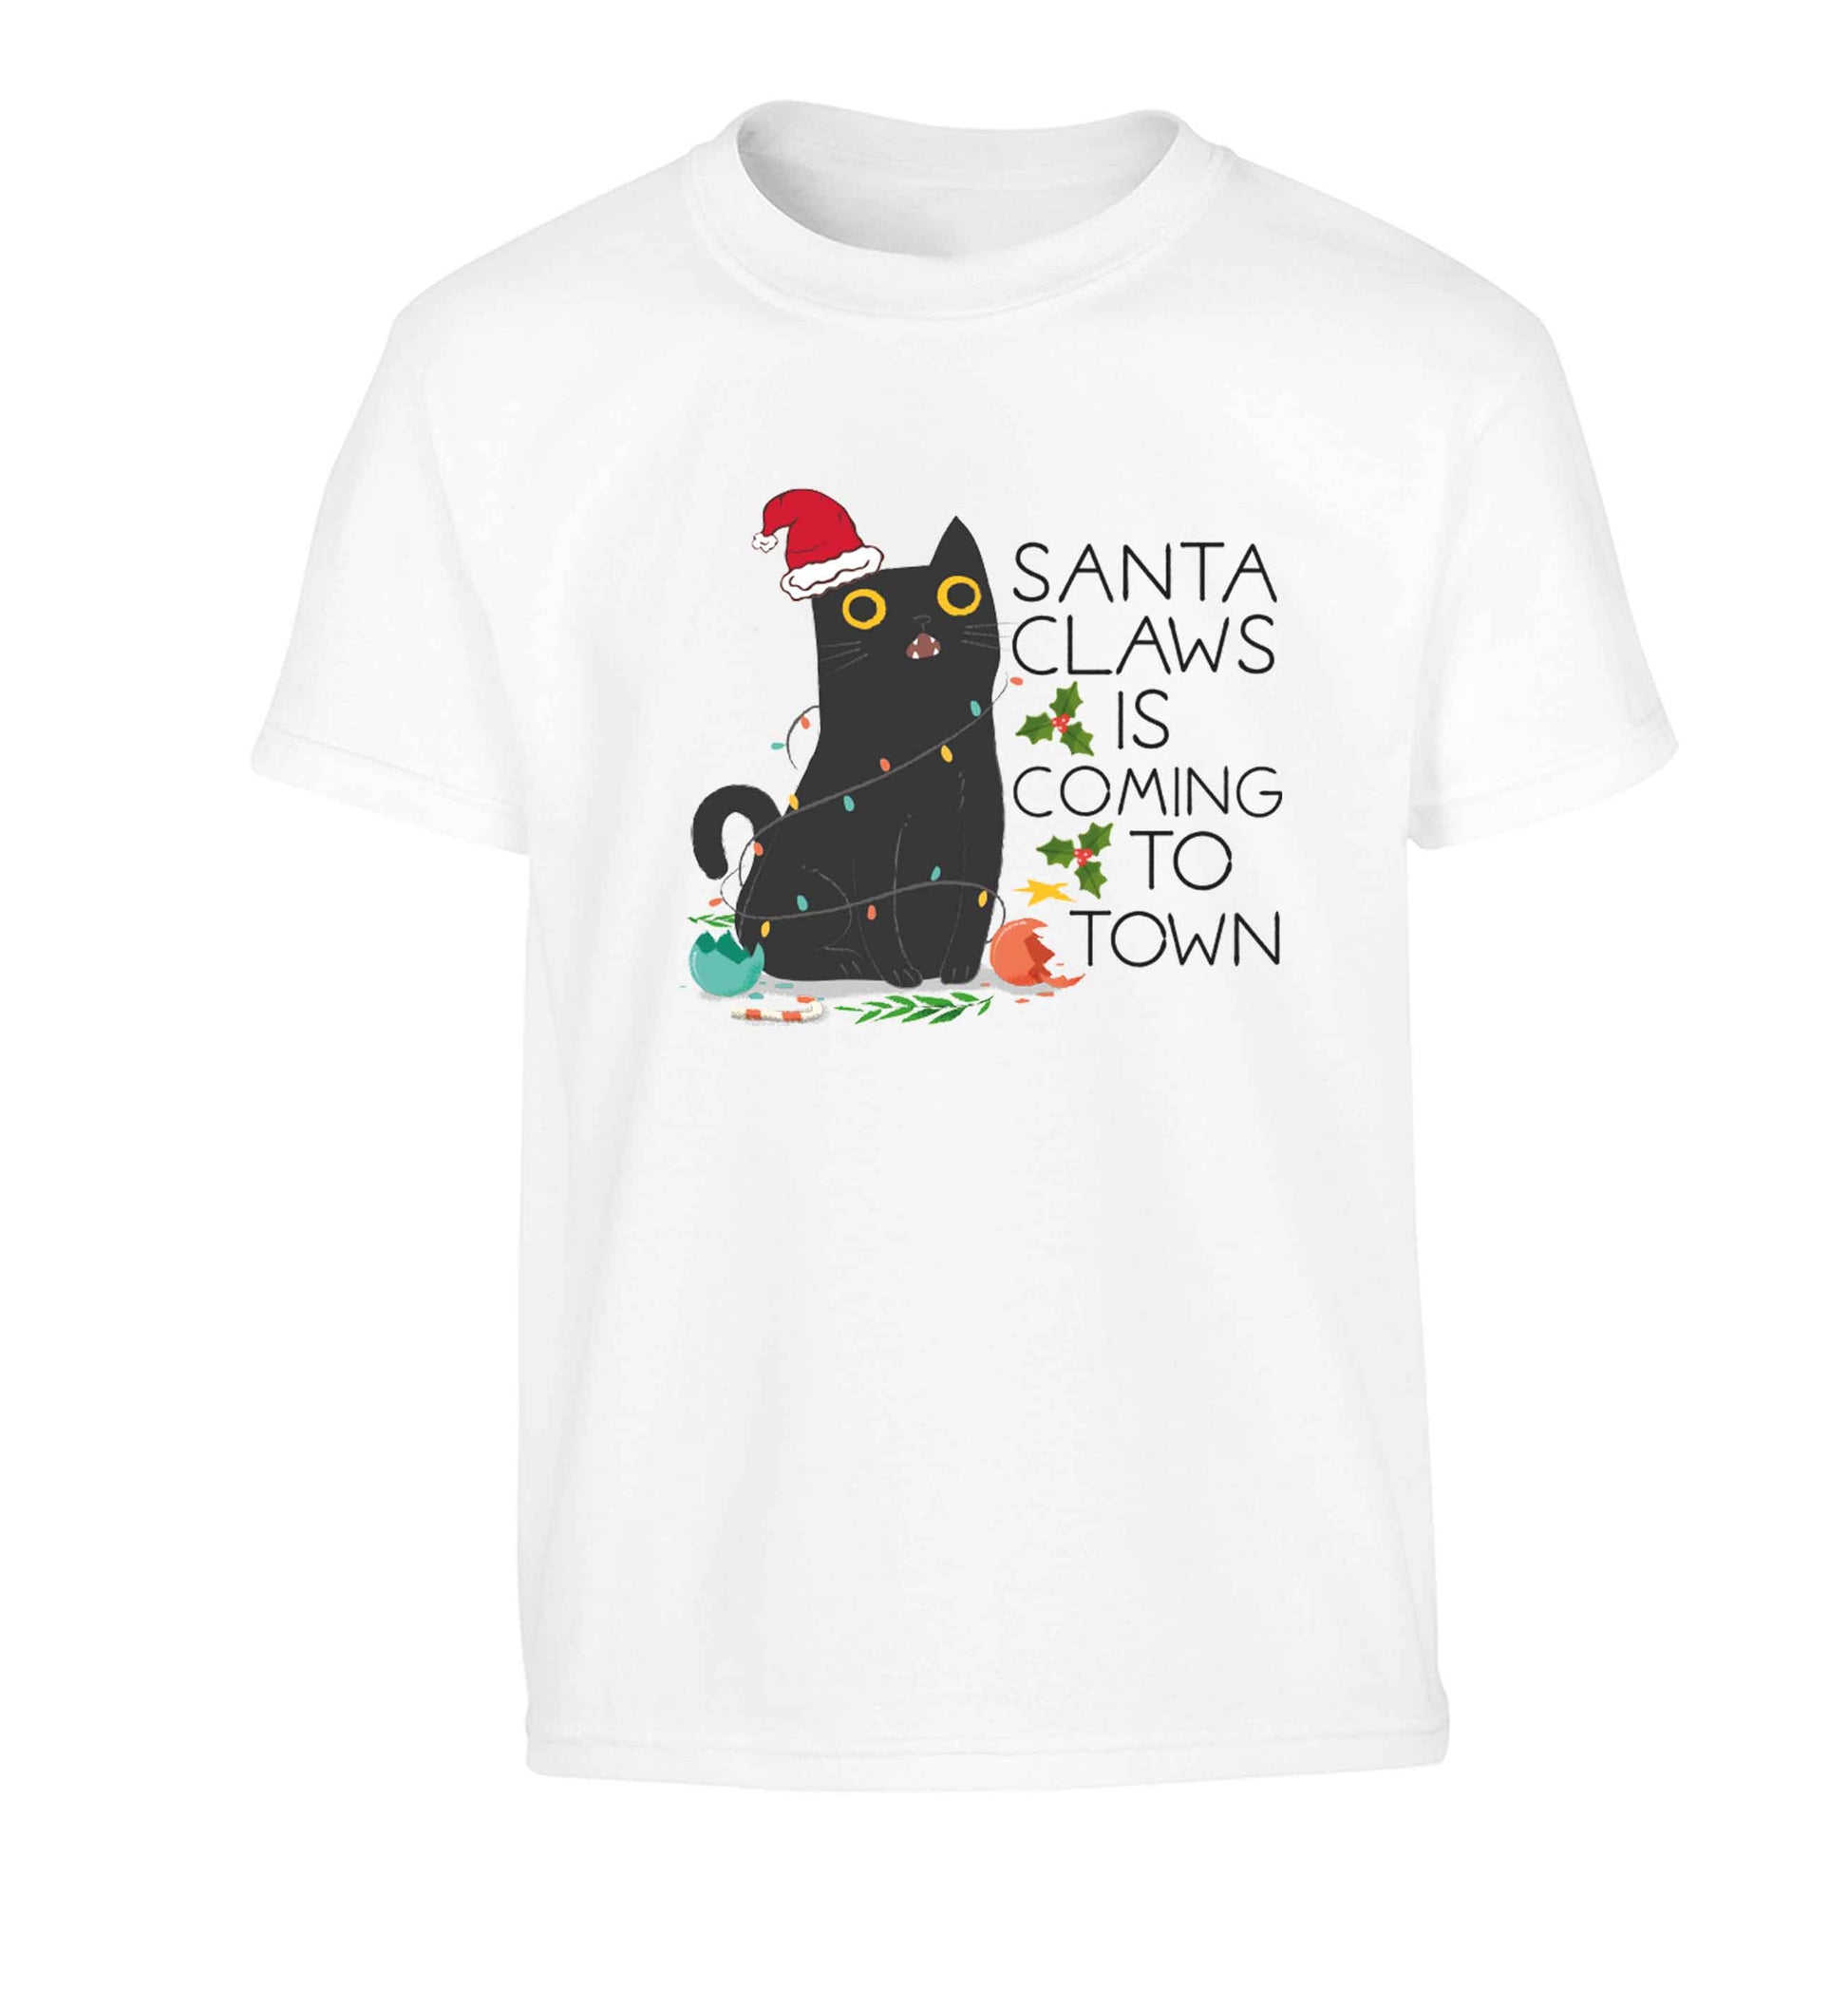 Santa claws is coming to town  Children's white Tshirt 12-13 Years